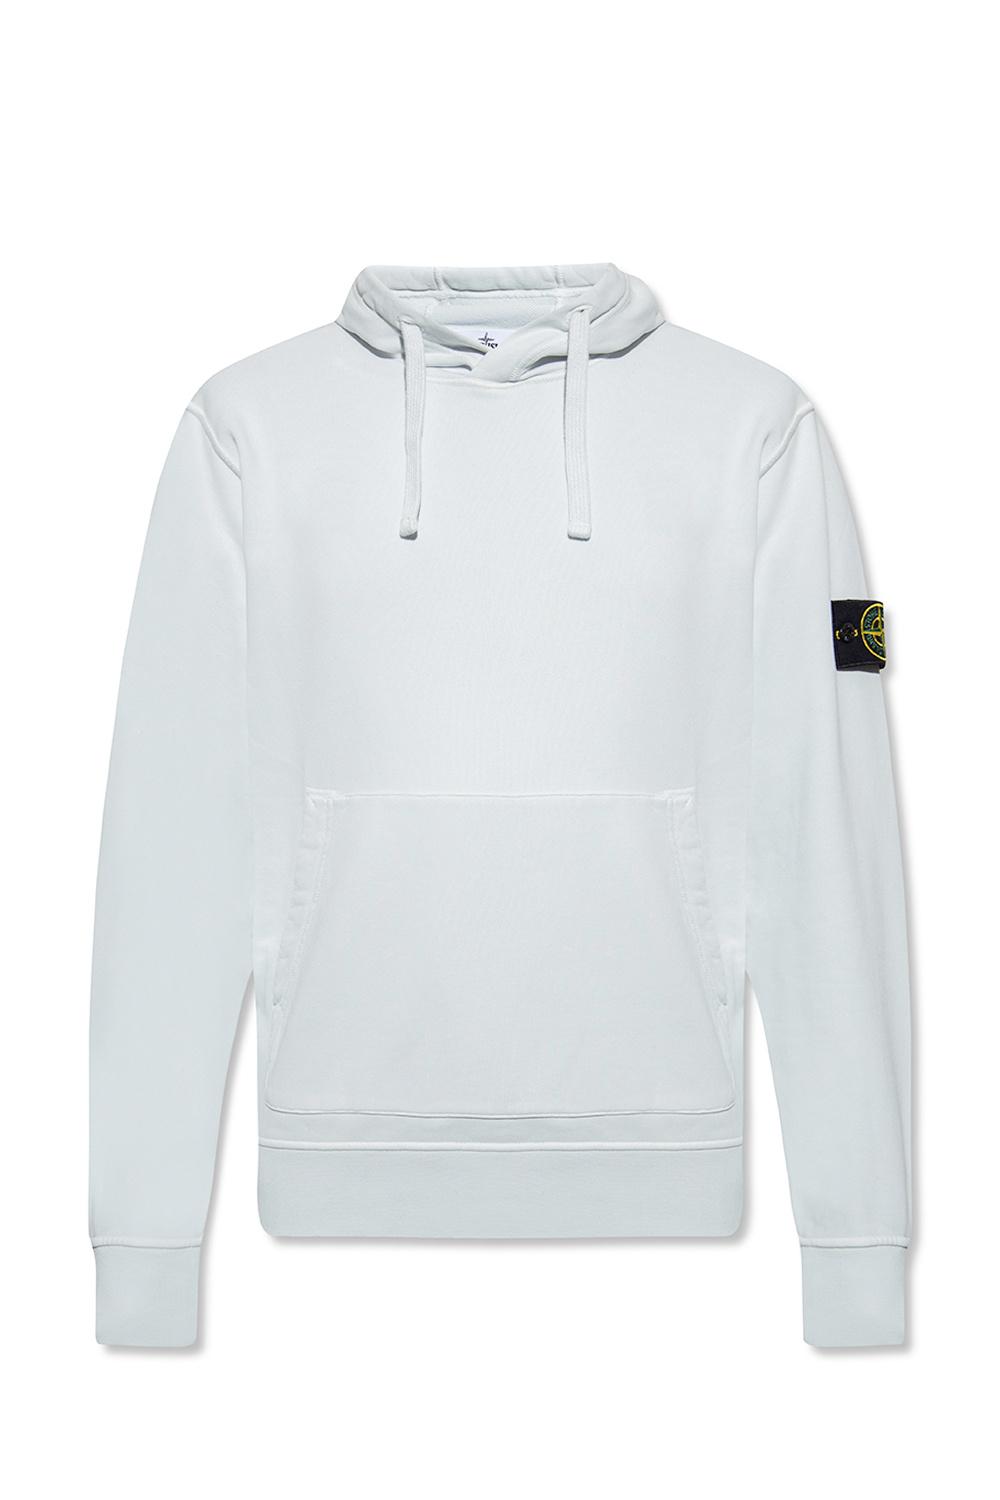 Stone Island Cotton Hoodie With Logo in Light Blue (Blue) for Men | Lyst